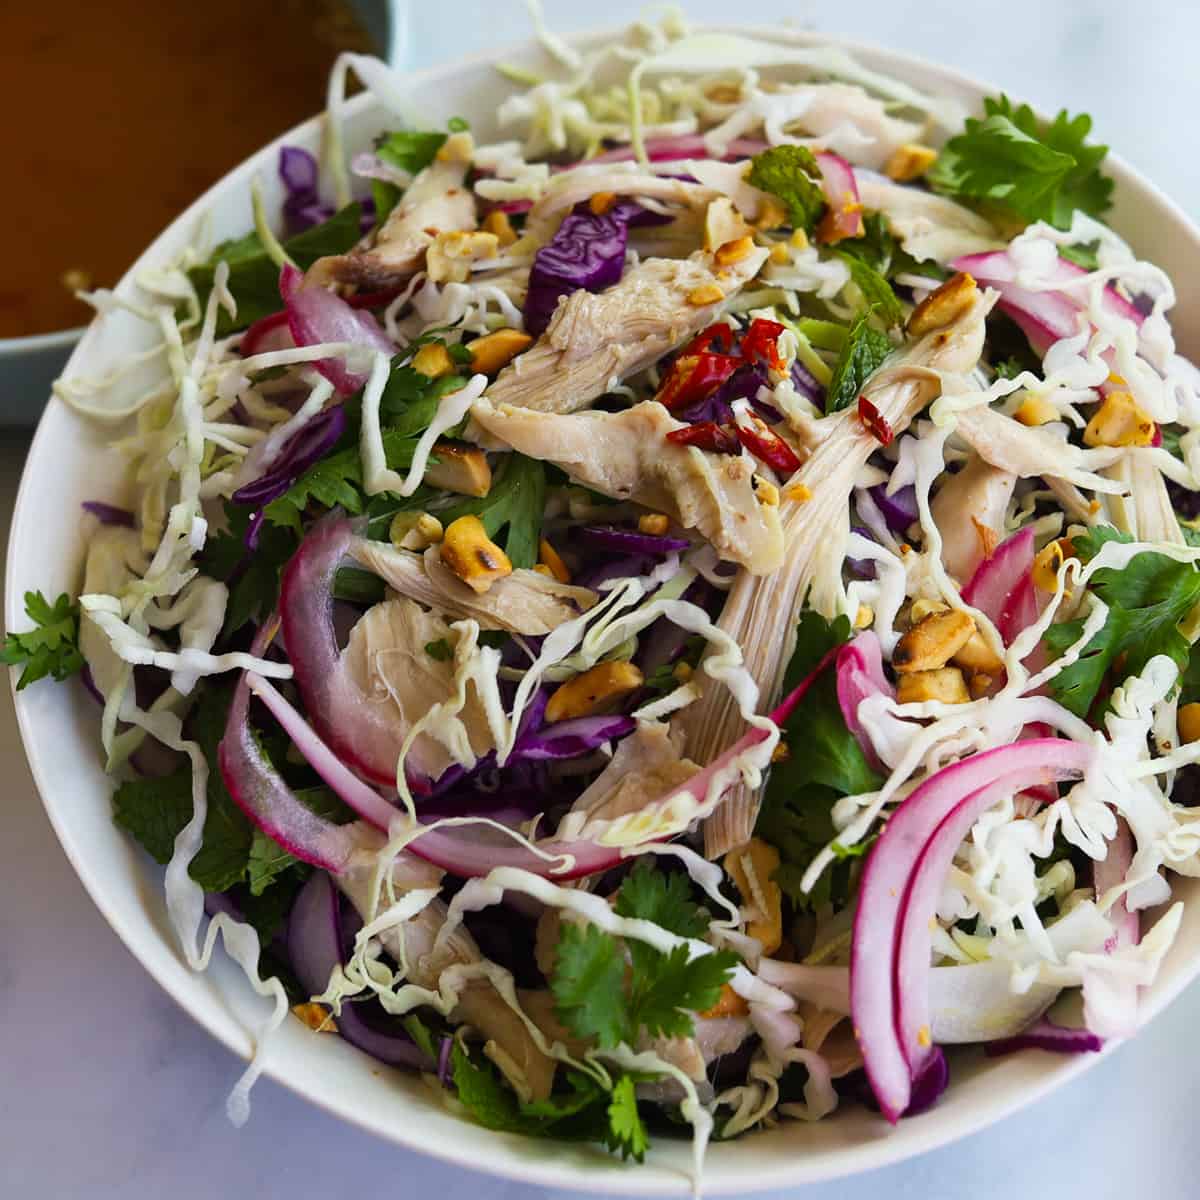 Image of cabbage salad with chicken and garnished with onions, cilantro, mint, peanuts.